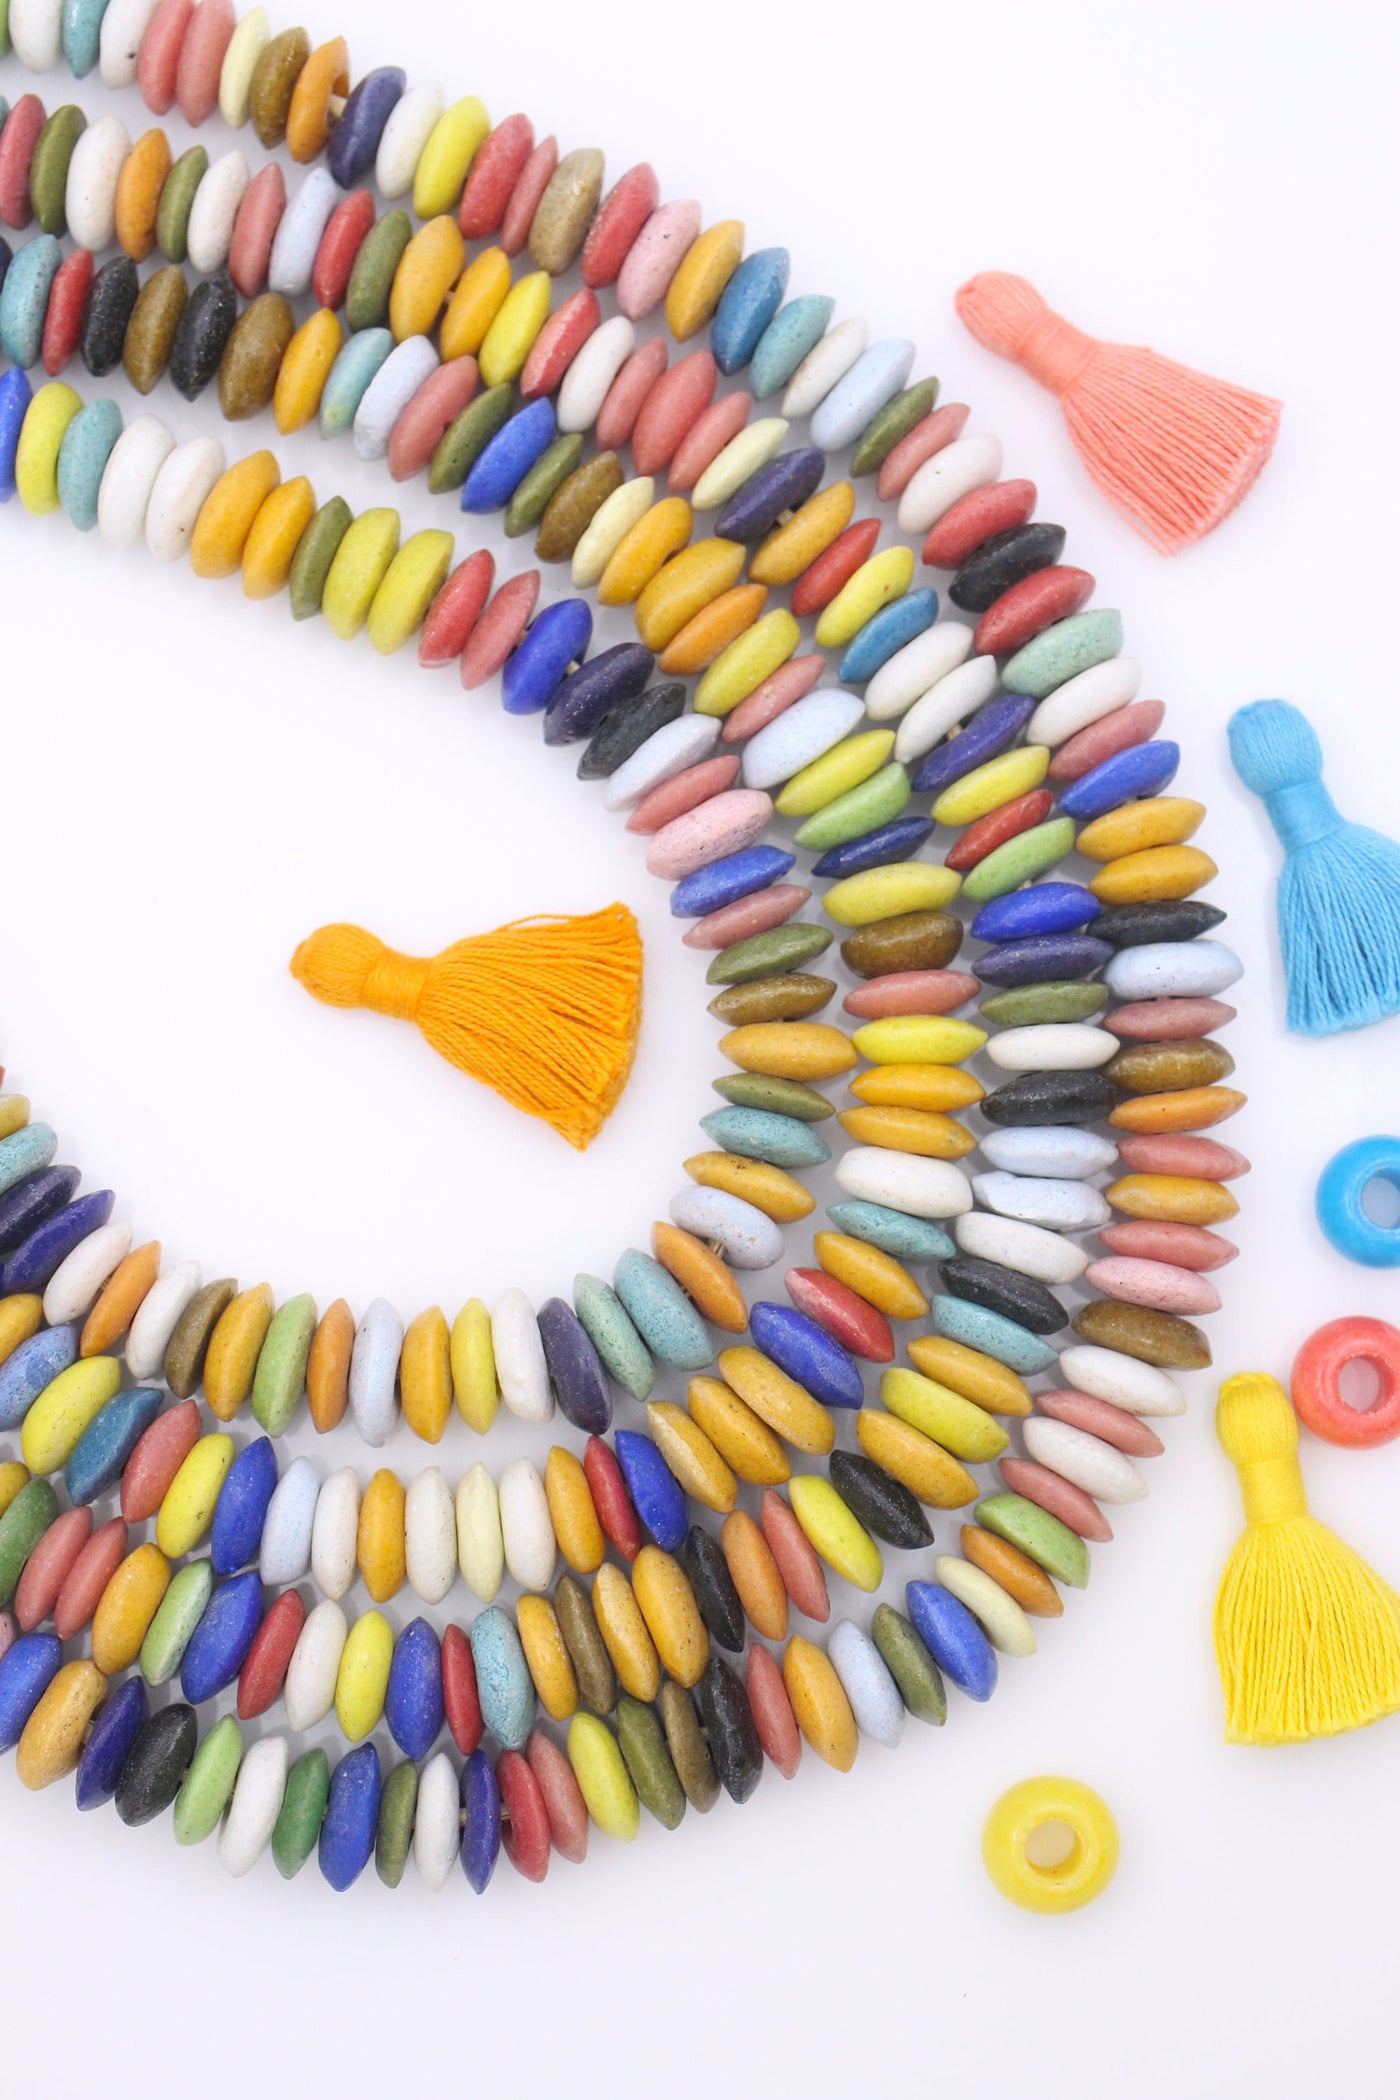 Multi Color Mix Ashanti Krobo Beads, African Glass Rondelle Necklace, 14x3mm, Large Hole Boho Colorful Jewelry Making Supplies, 110 Beads